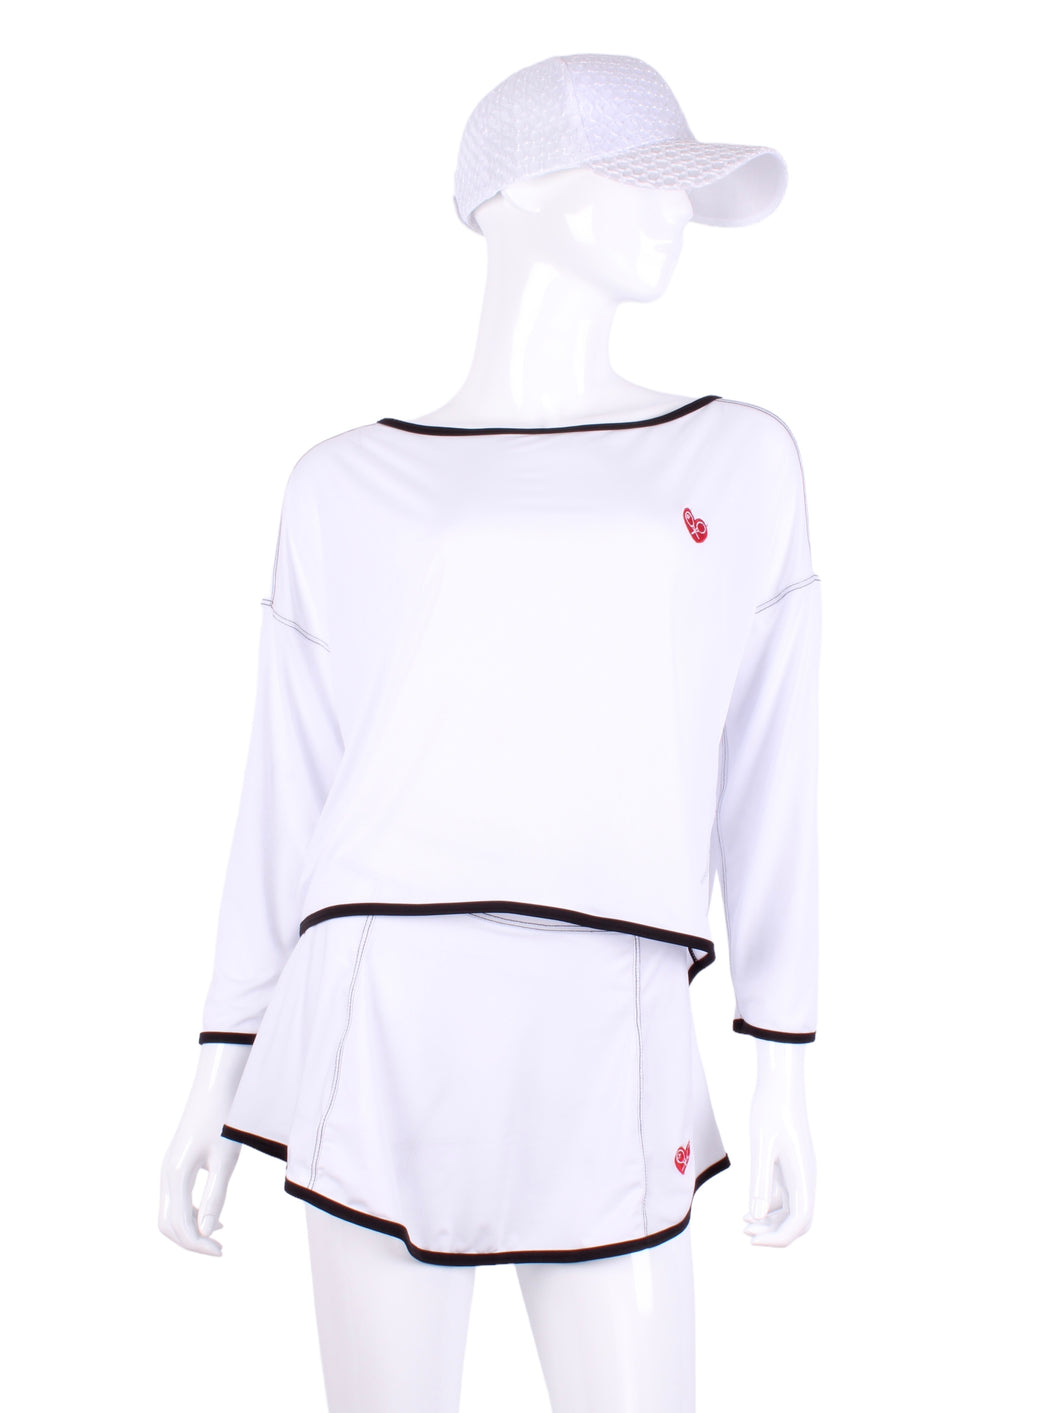 Long Sleeve Baggy Top White - I LOVE MY DOUBLES PARTNER!!!